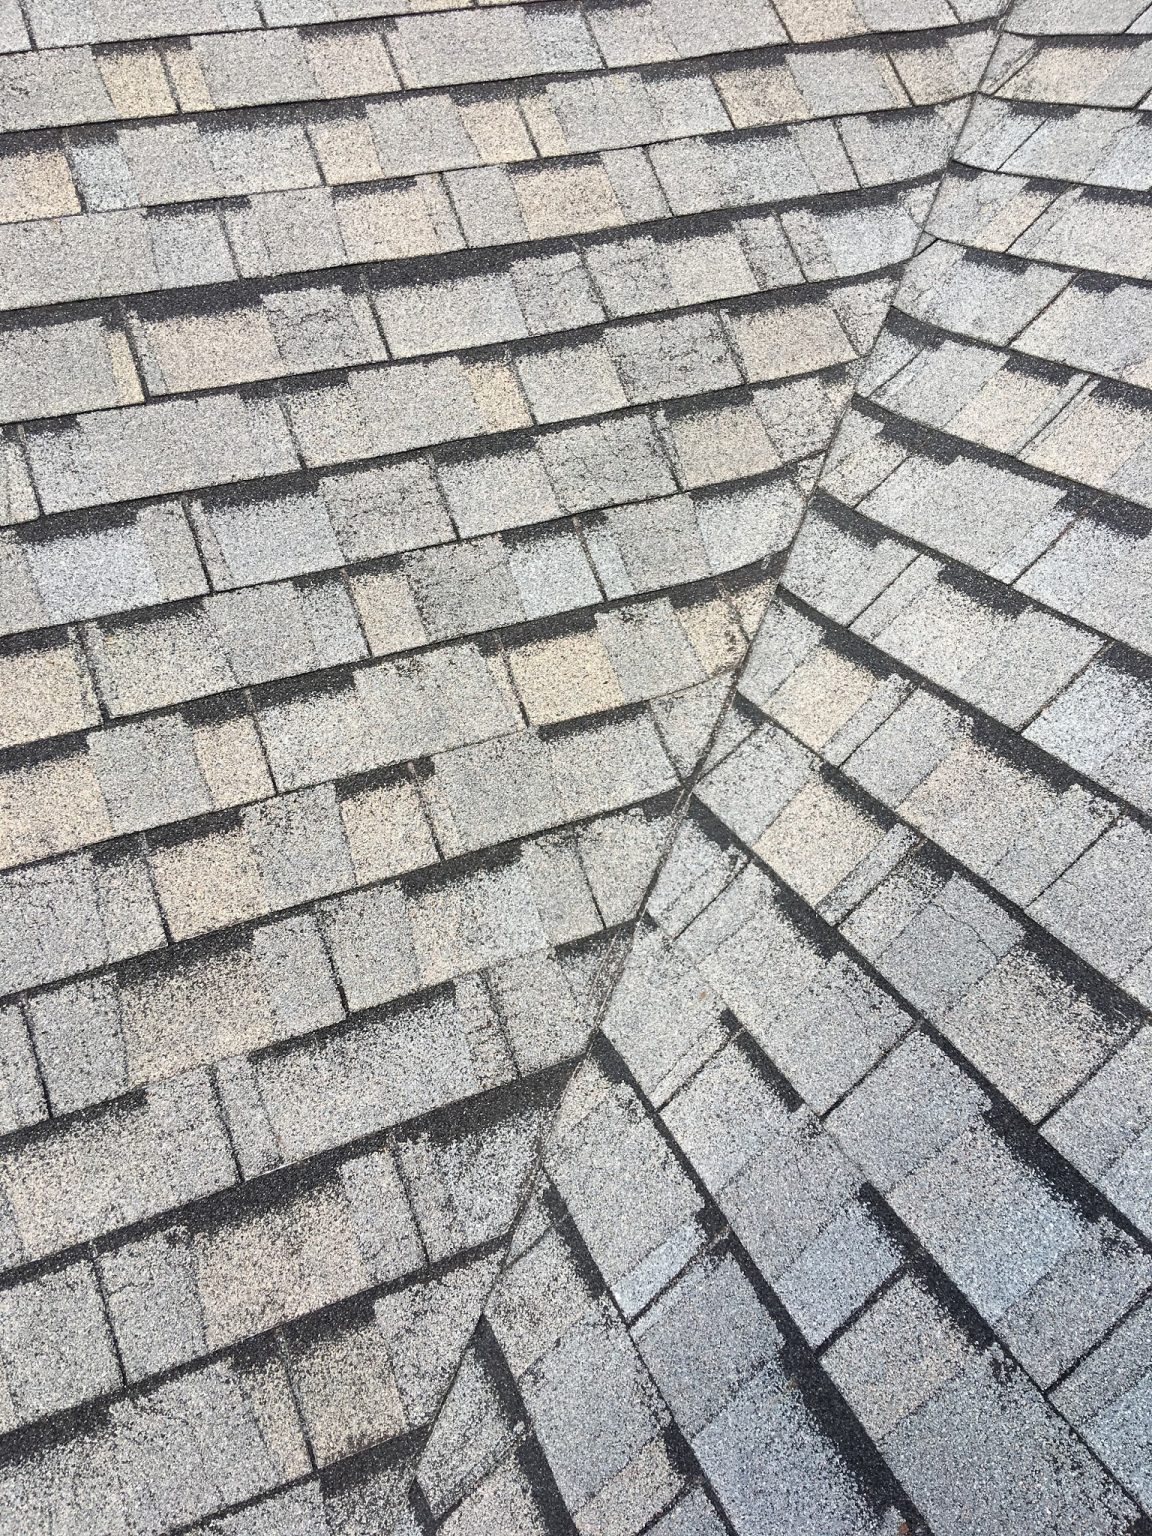 Defective Laminated 3 Tab Shingles - Litespeed Construction Knoxville